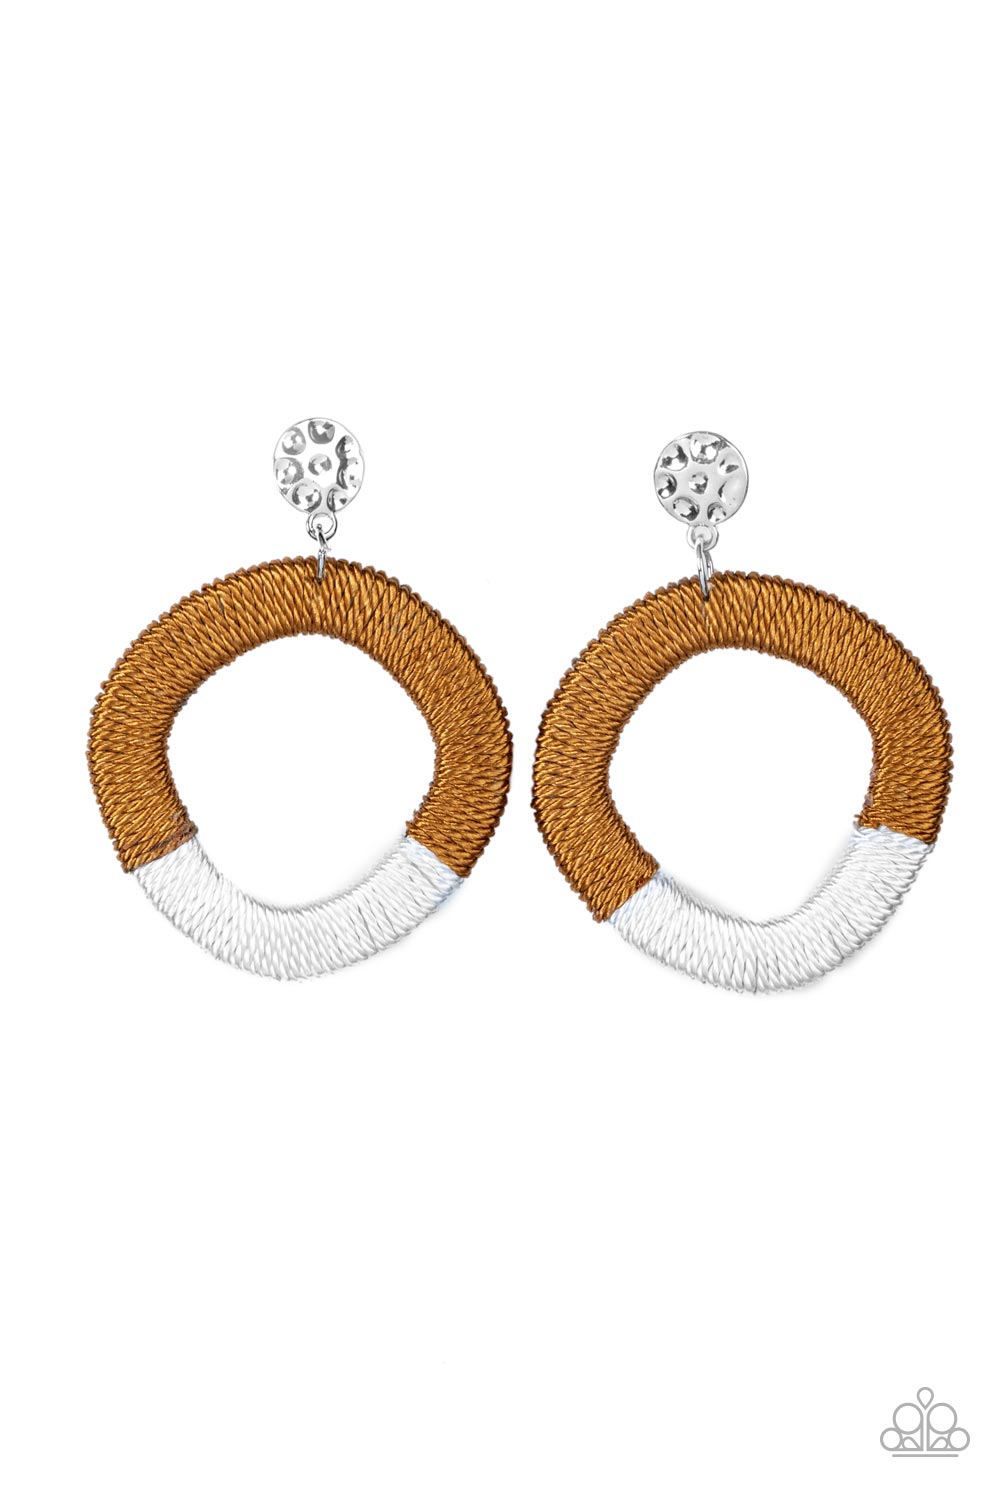 Thats a WRAPAROUND - Brown Threaded Earrings a hammered silver disc gives way to a wooden frame decoratively wrapped in shiny white and brown threaded accents, creating a colorful lure. Earring attaches to a standard post fitting.  Sold as one pair of post earrings.